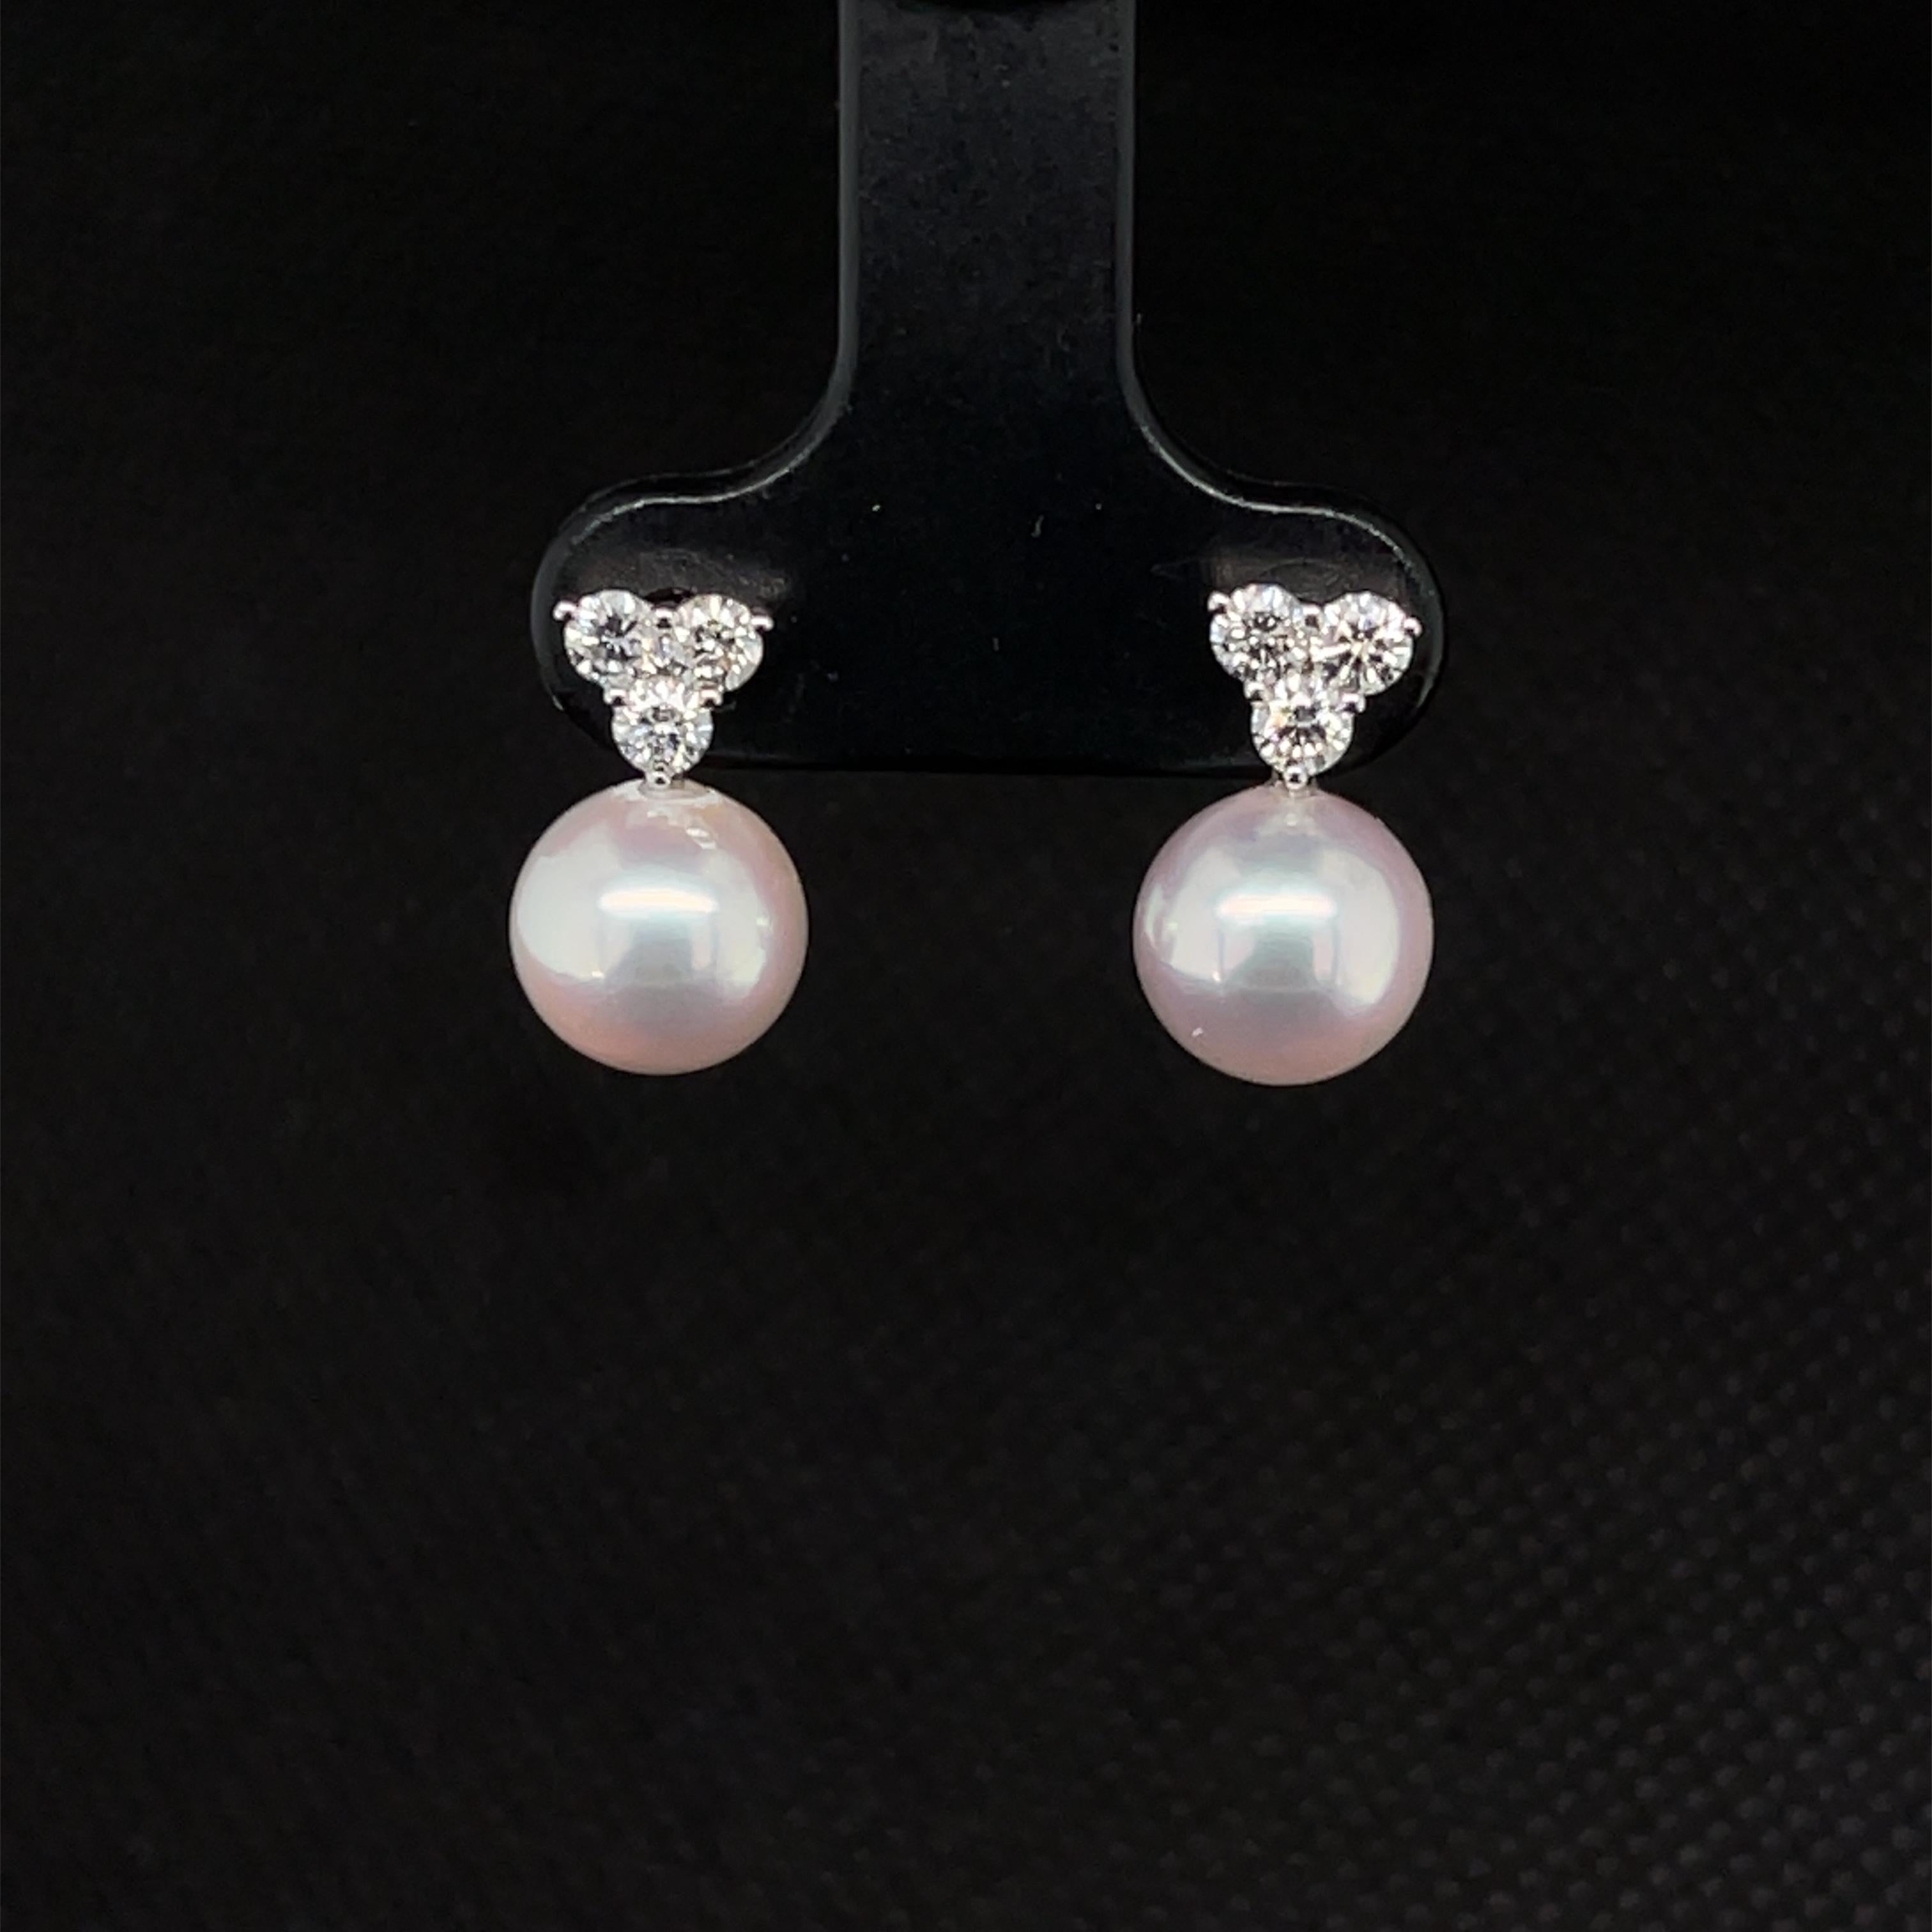 These gorgeous pearl and diamond stud earrings feature a beautifully matched pair of 8.00 mm Akoya saltwater pearls set in 18k white gold. Three round brilliant cut diamonds have been arranged in an inverted triangular and set above each pearl for